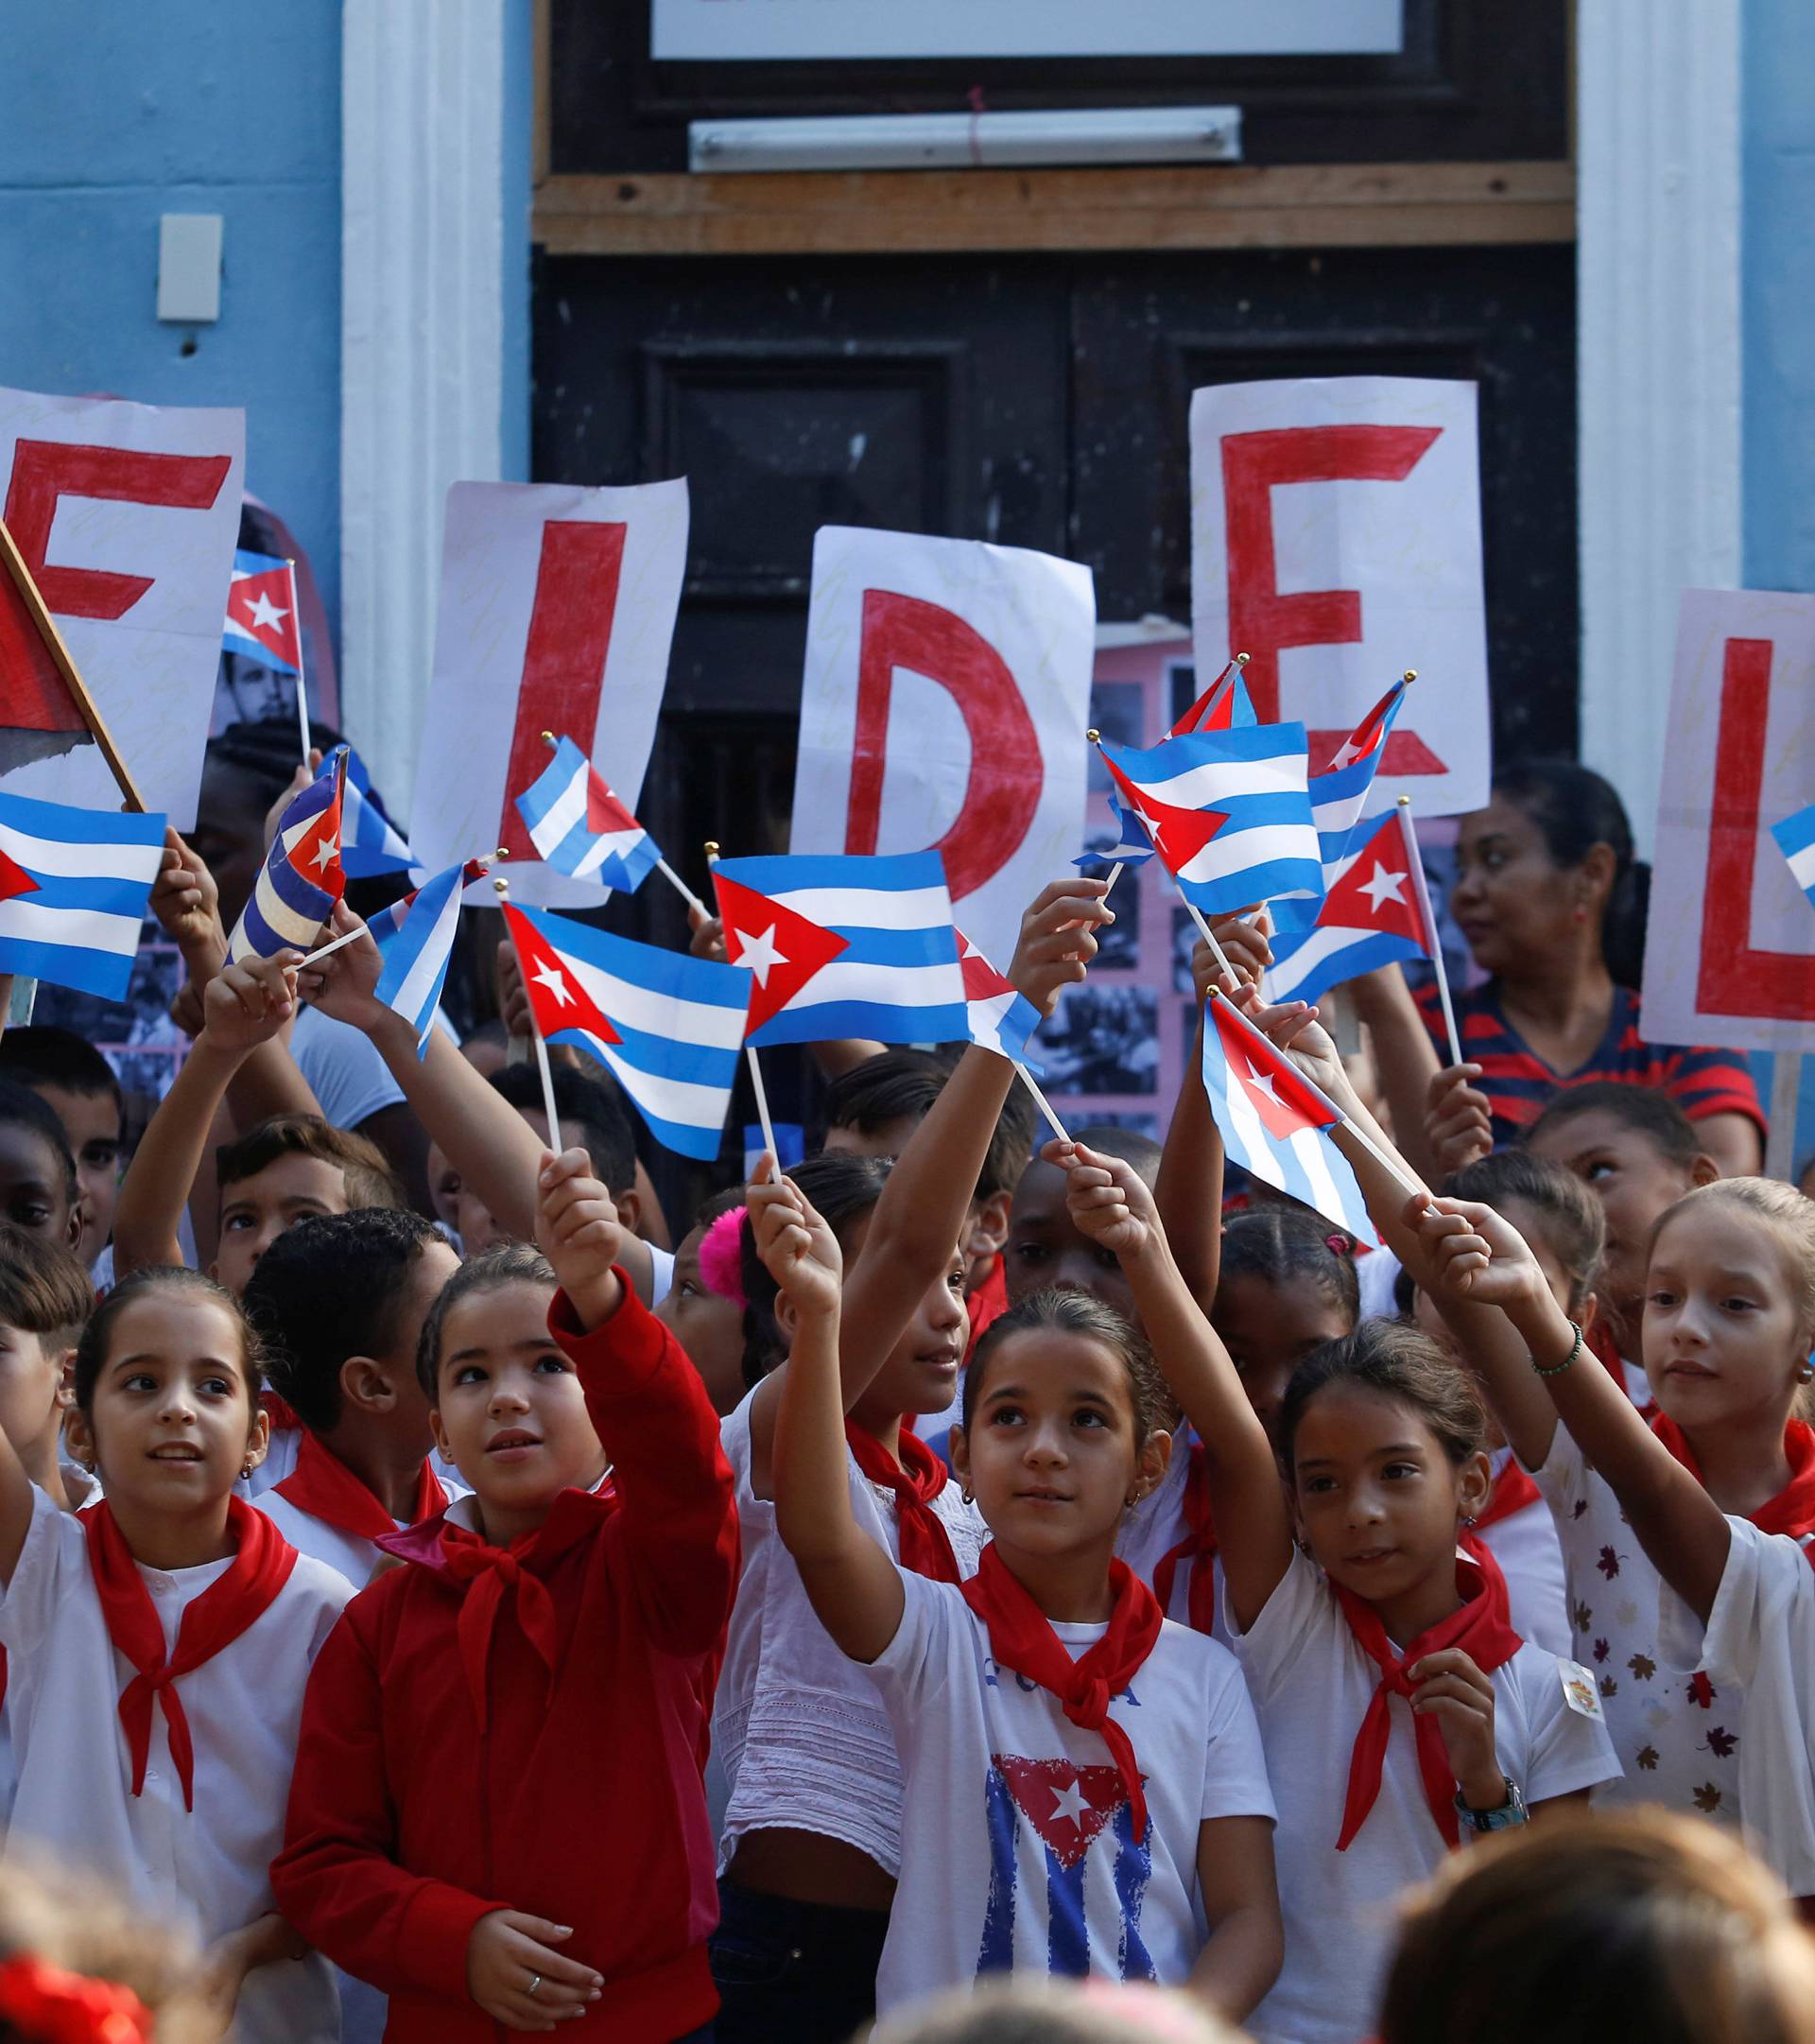 Children perform an act in a school to commemorate the first anniversary of the death of Cuba's late president Fidel Castro, in Havana